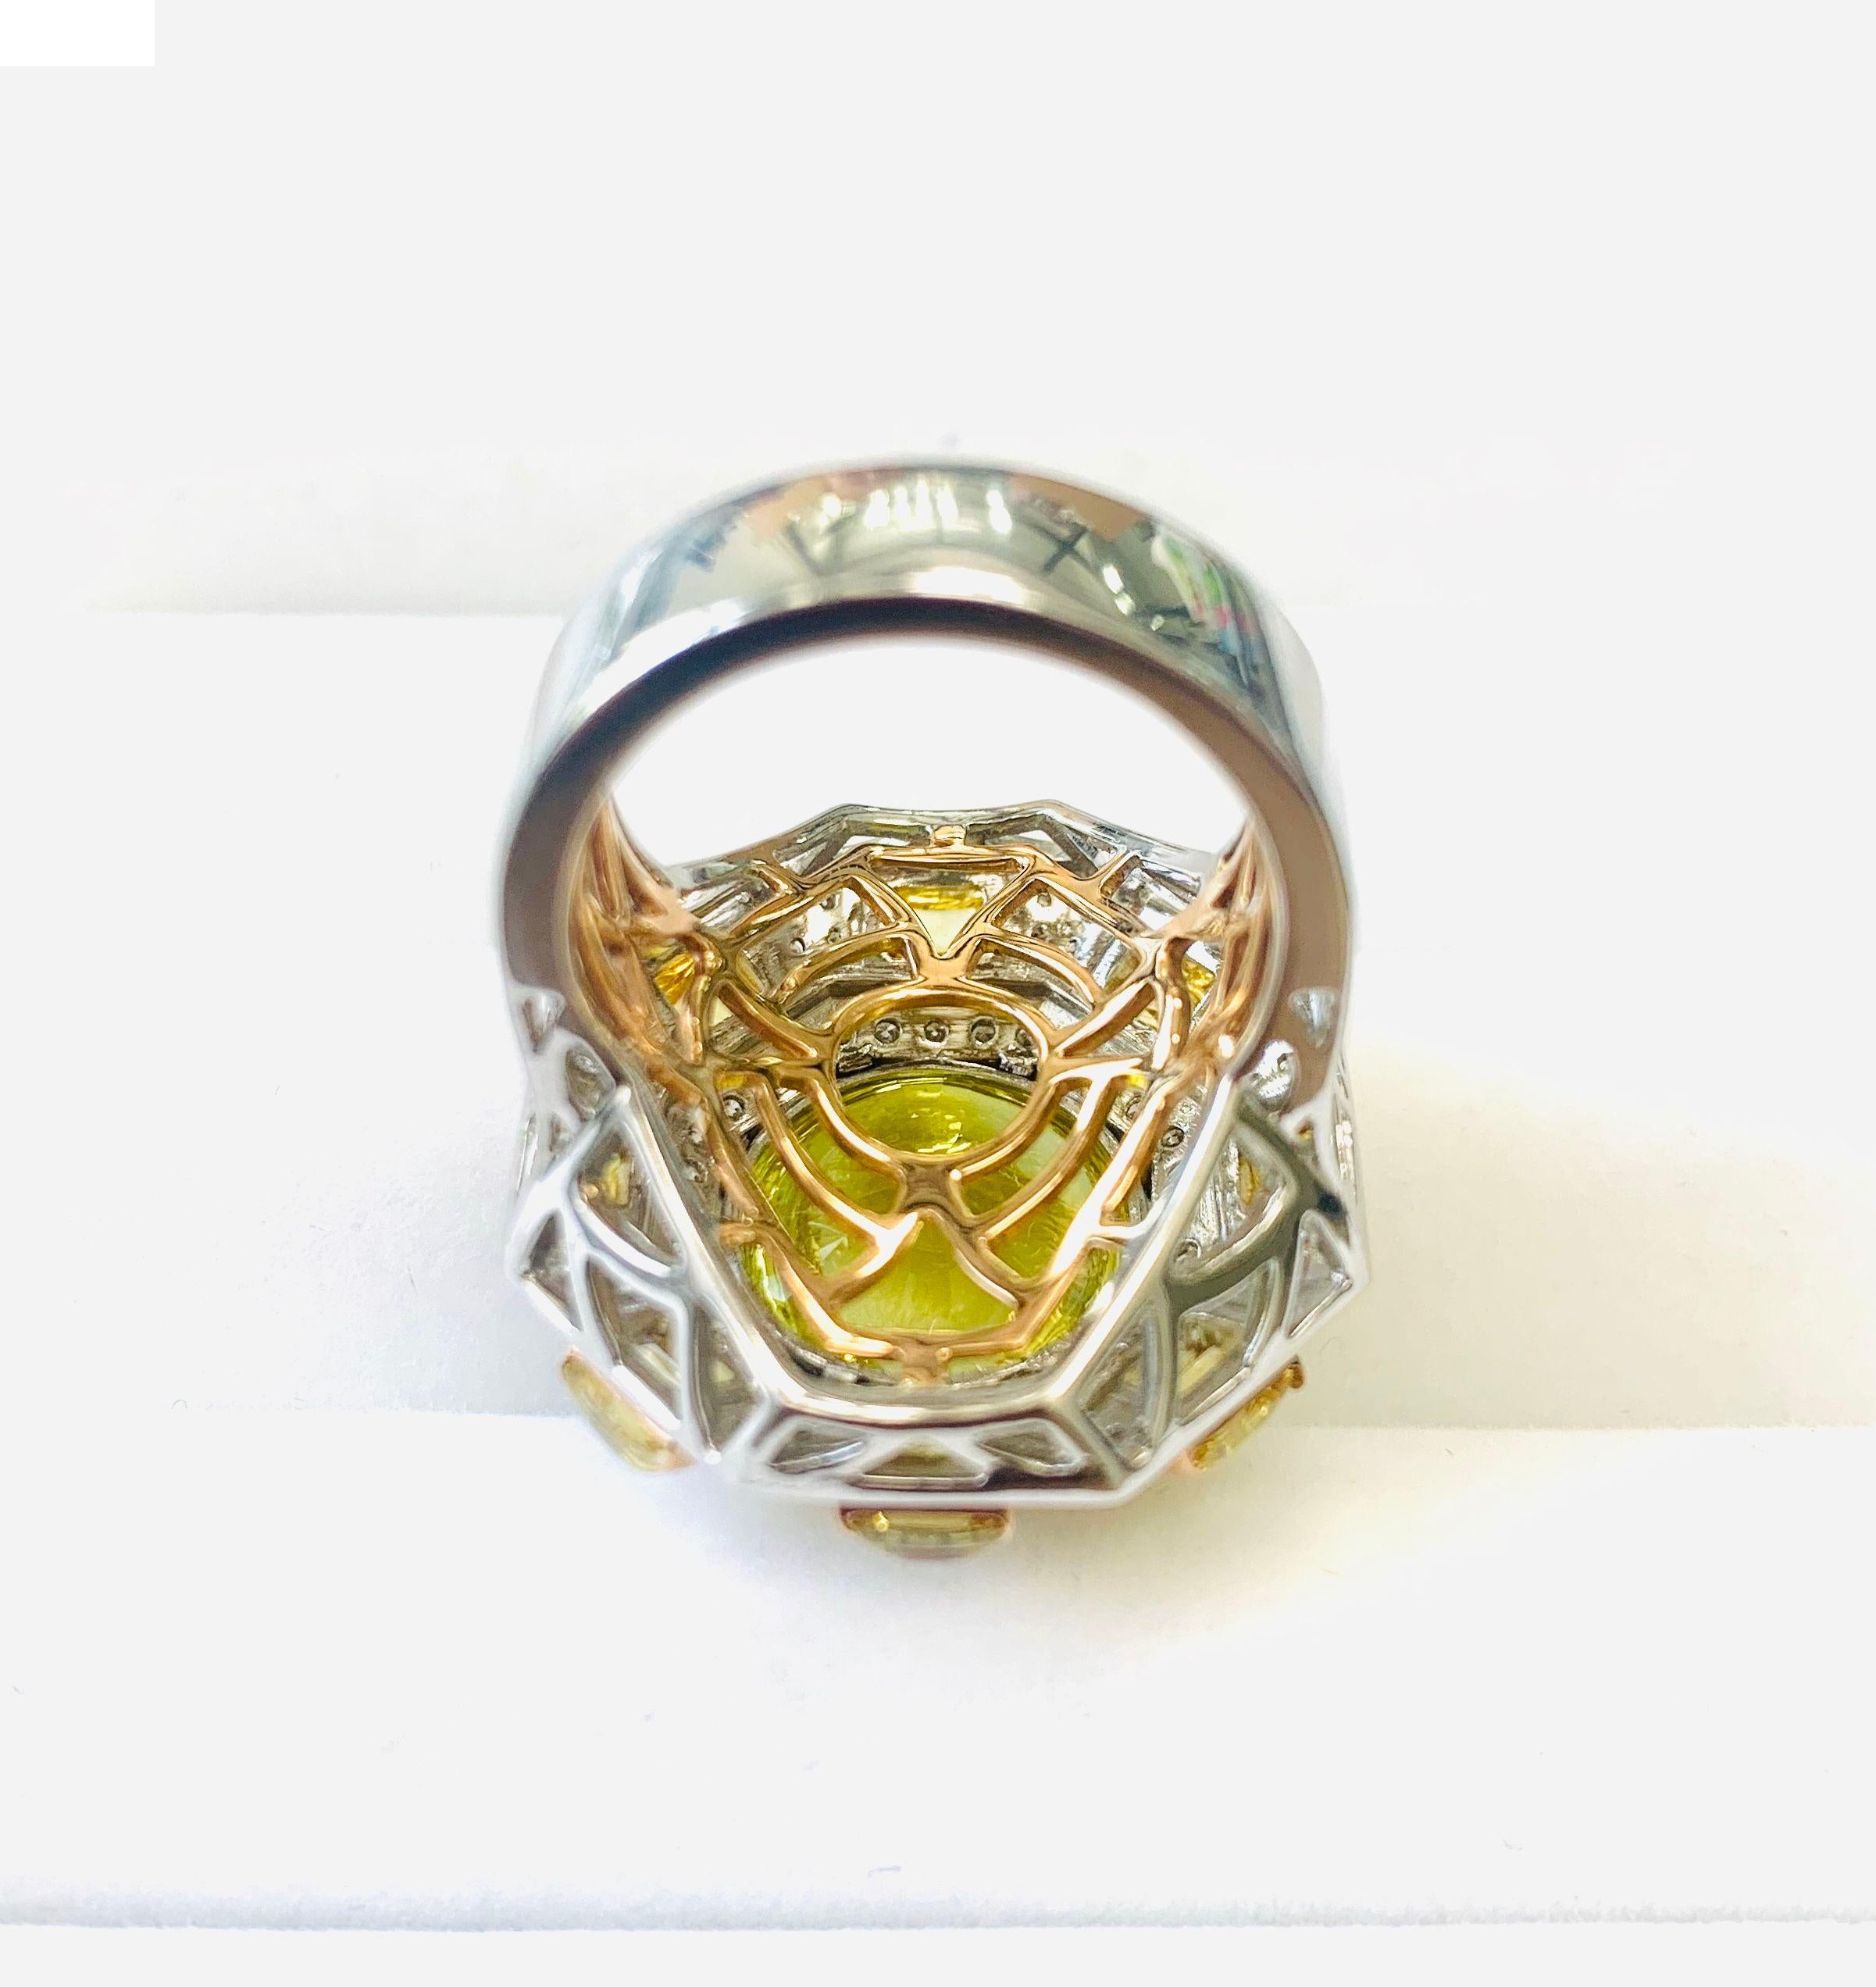 Just in time for summer, this 18k gold and palladium ring exudes a tropical vibe with its bright, lemony color. The joyous honey yellow hue is created with a faceted scapolite showcasing a blend of yellow hues, surrounded by eight smaller scapolites